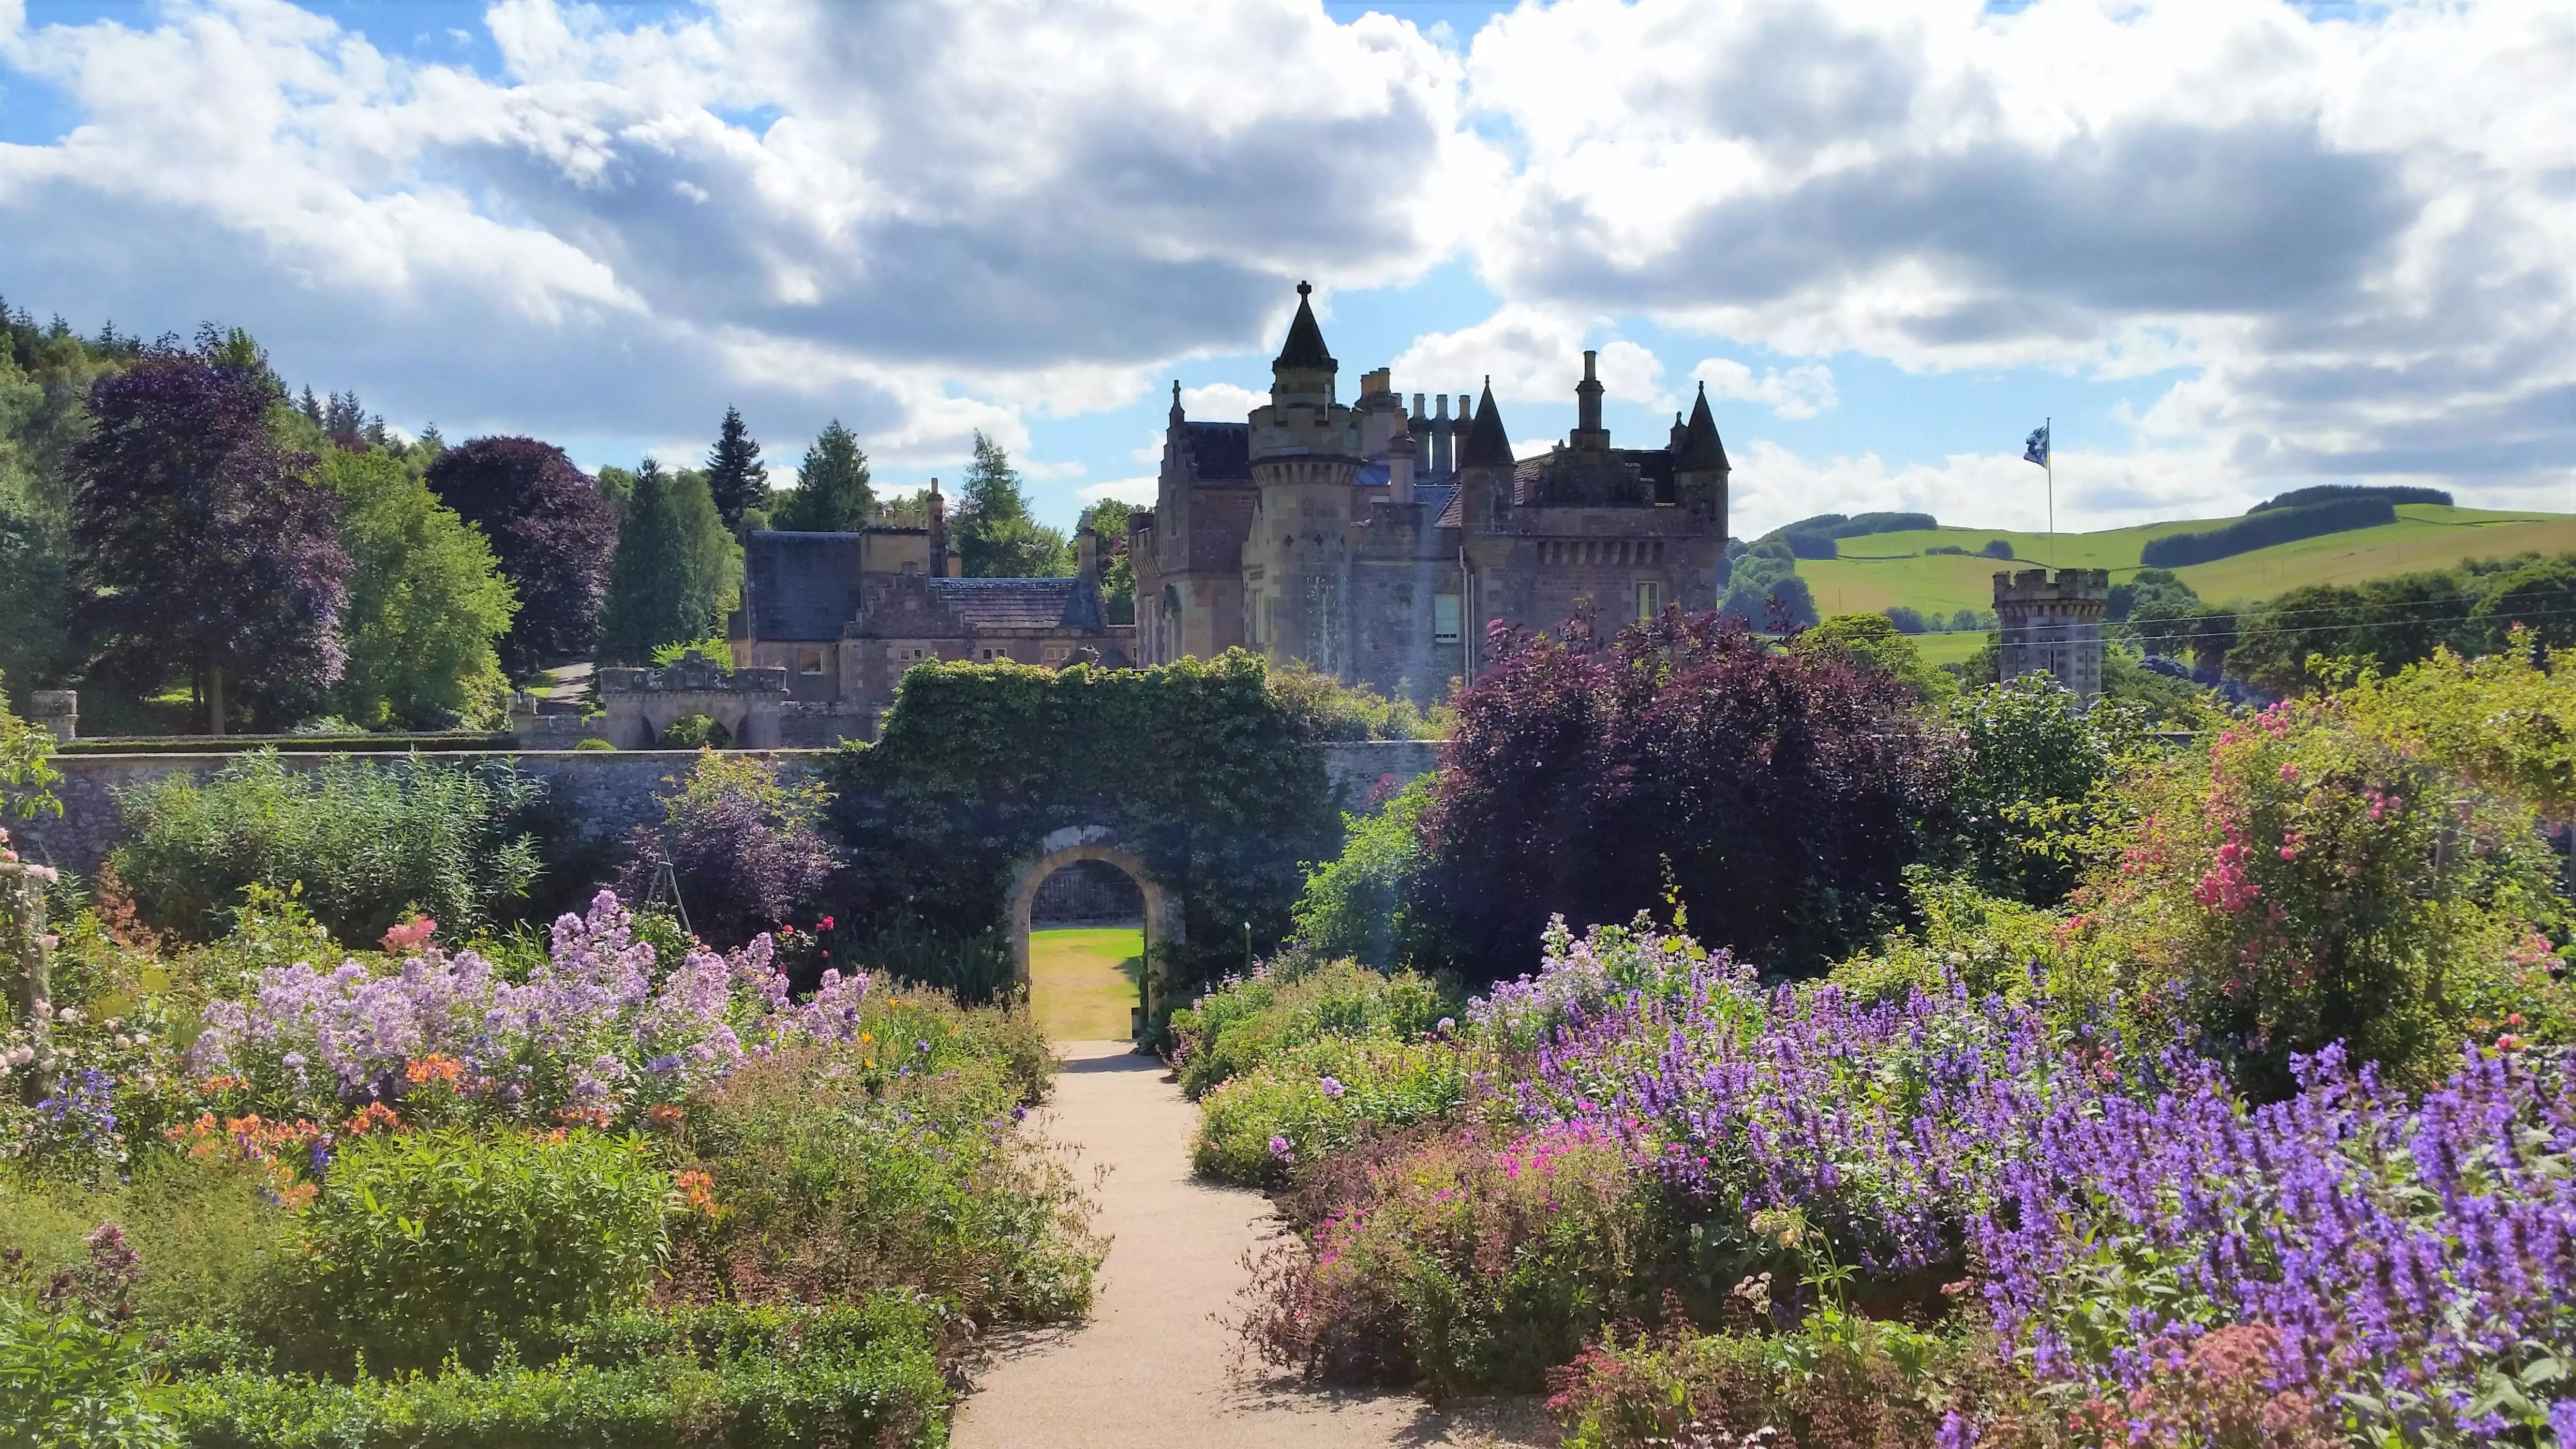 Abbotsford House, located in the Scottish Borders and once home to the writer Sir Walter Scott